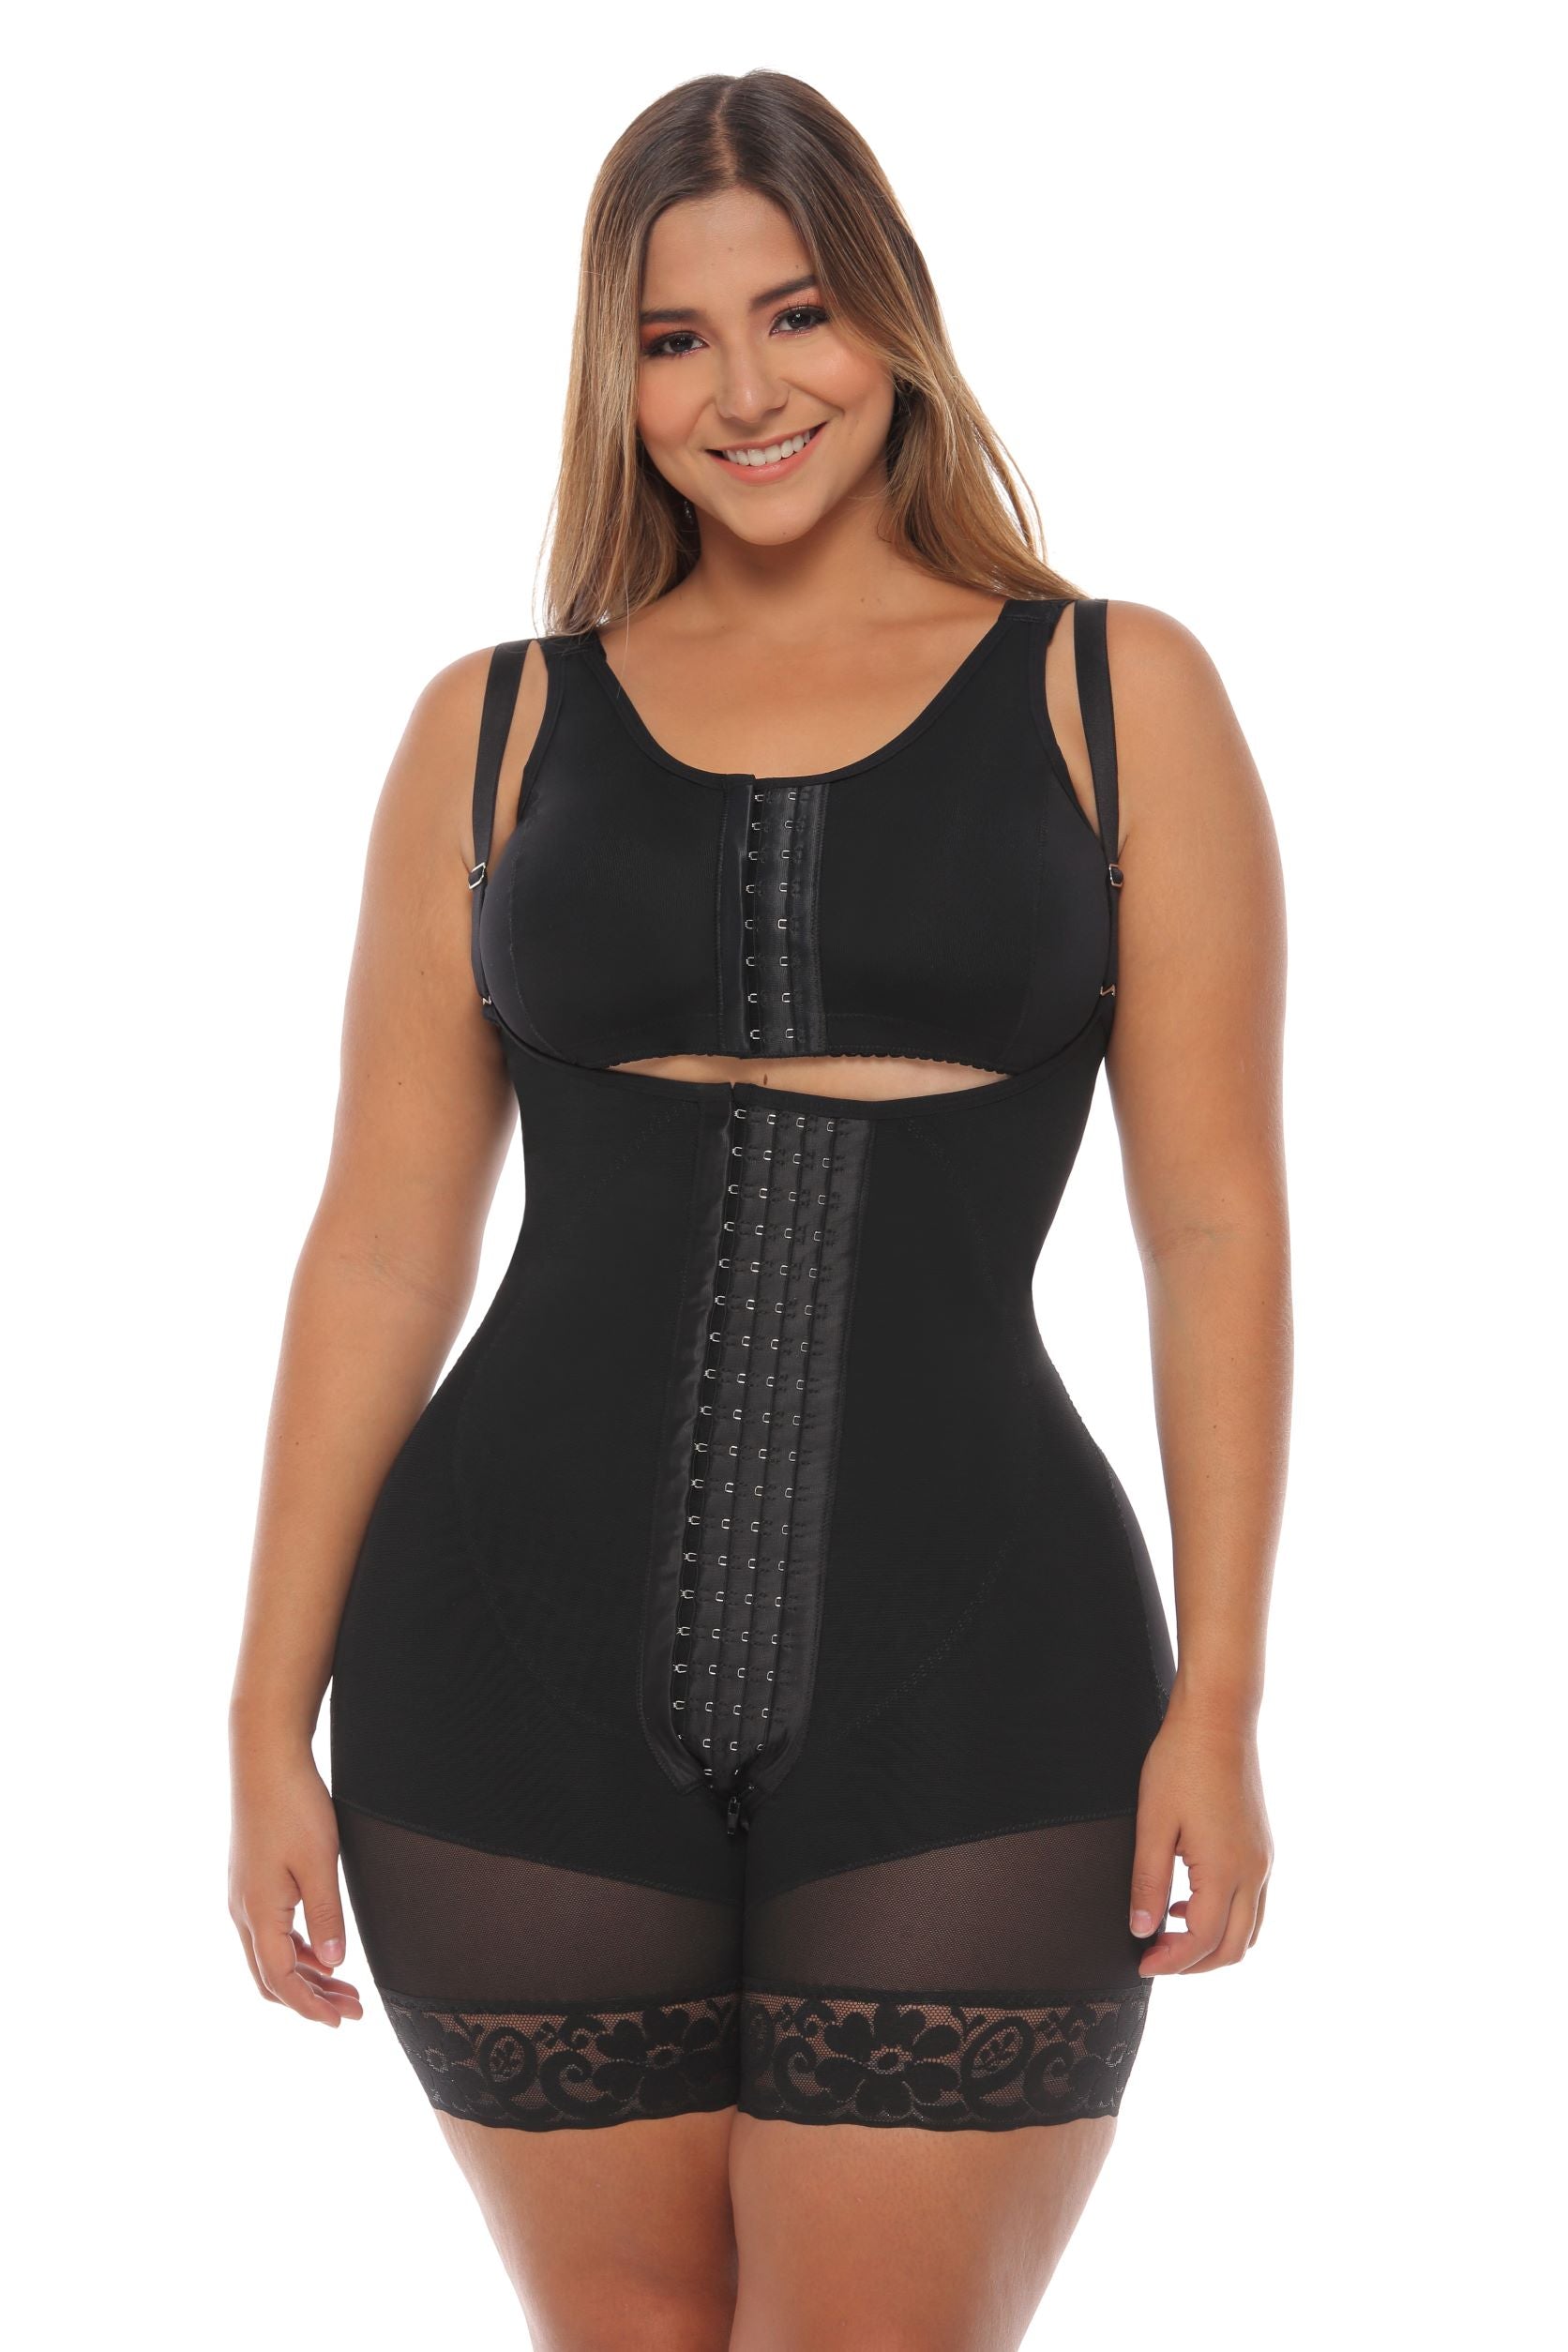 High Compression Hourglass Fgure Skims Shapers Shapewear Sexy Charming  Curves Waist Trainer Butt Lifter Corset Fajas Colombianas 231220 From 24,14  €